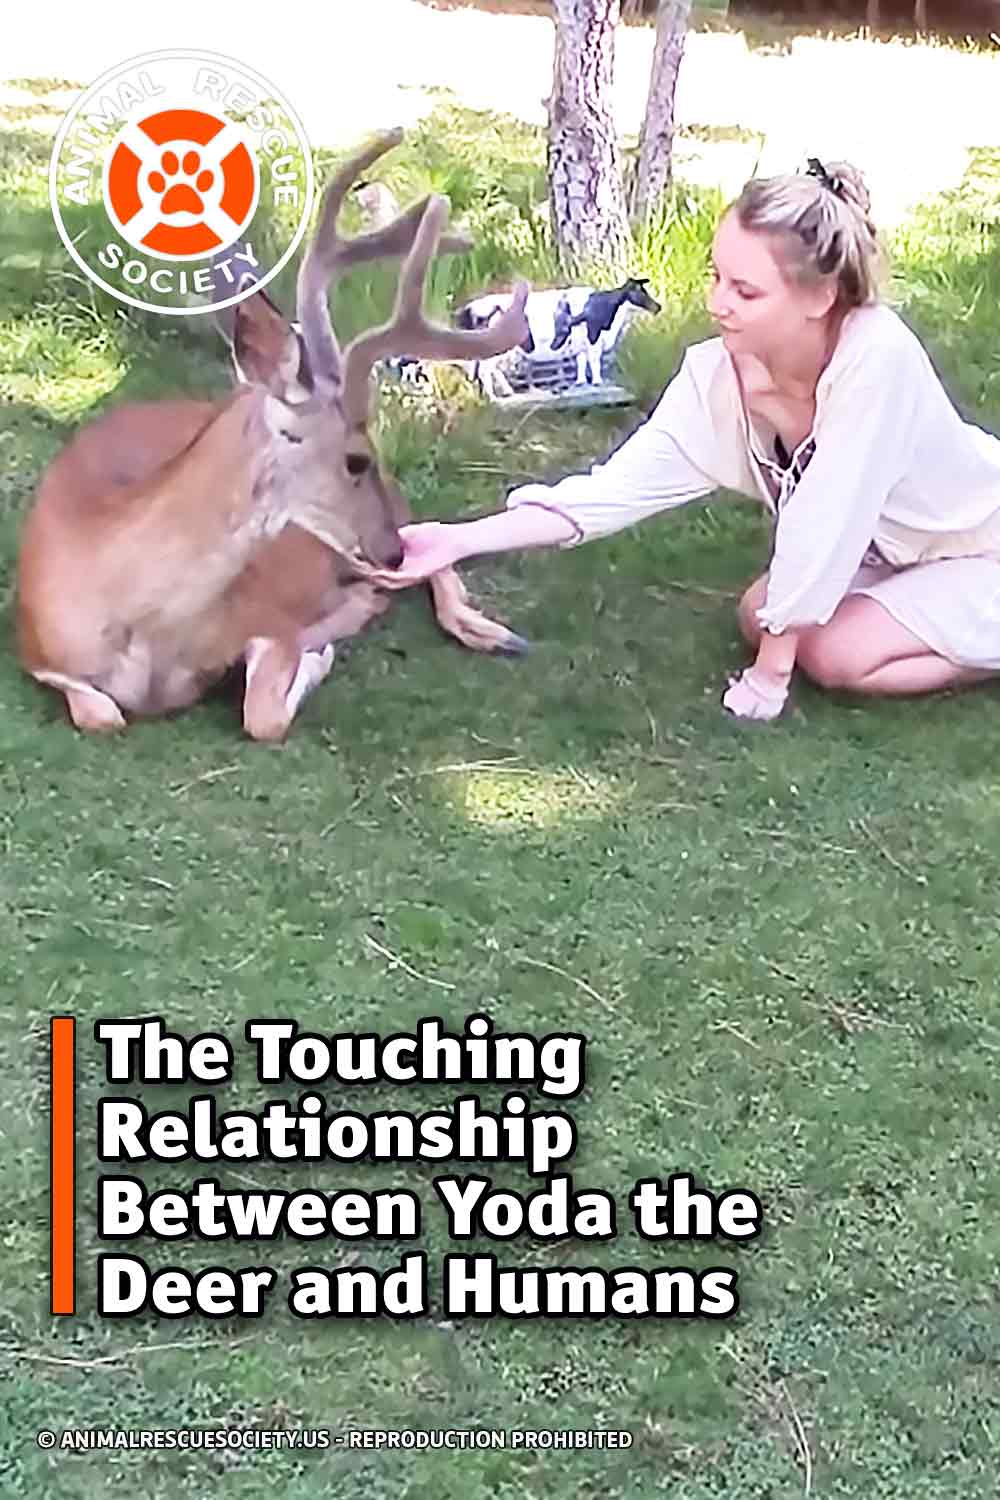 The Touching Relationship Between Yoda the Deer and Humans